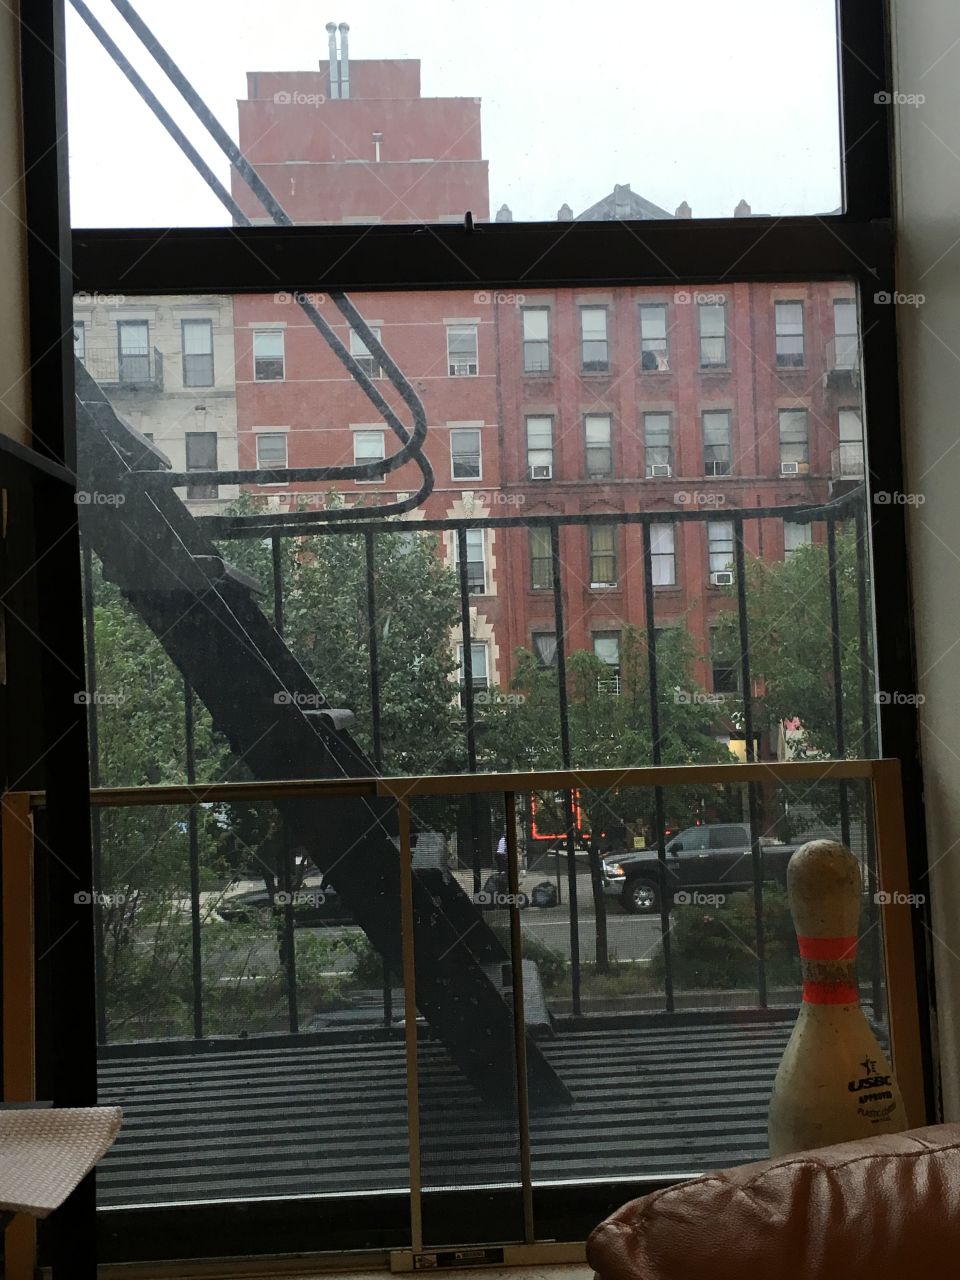 A fire escape for a rainy day